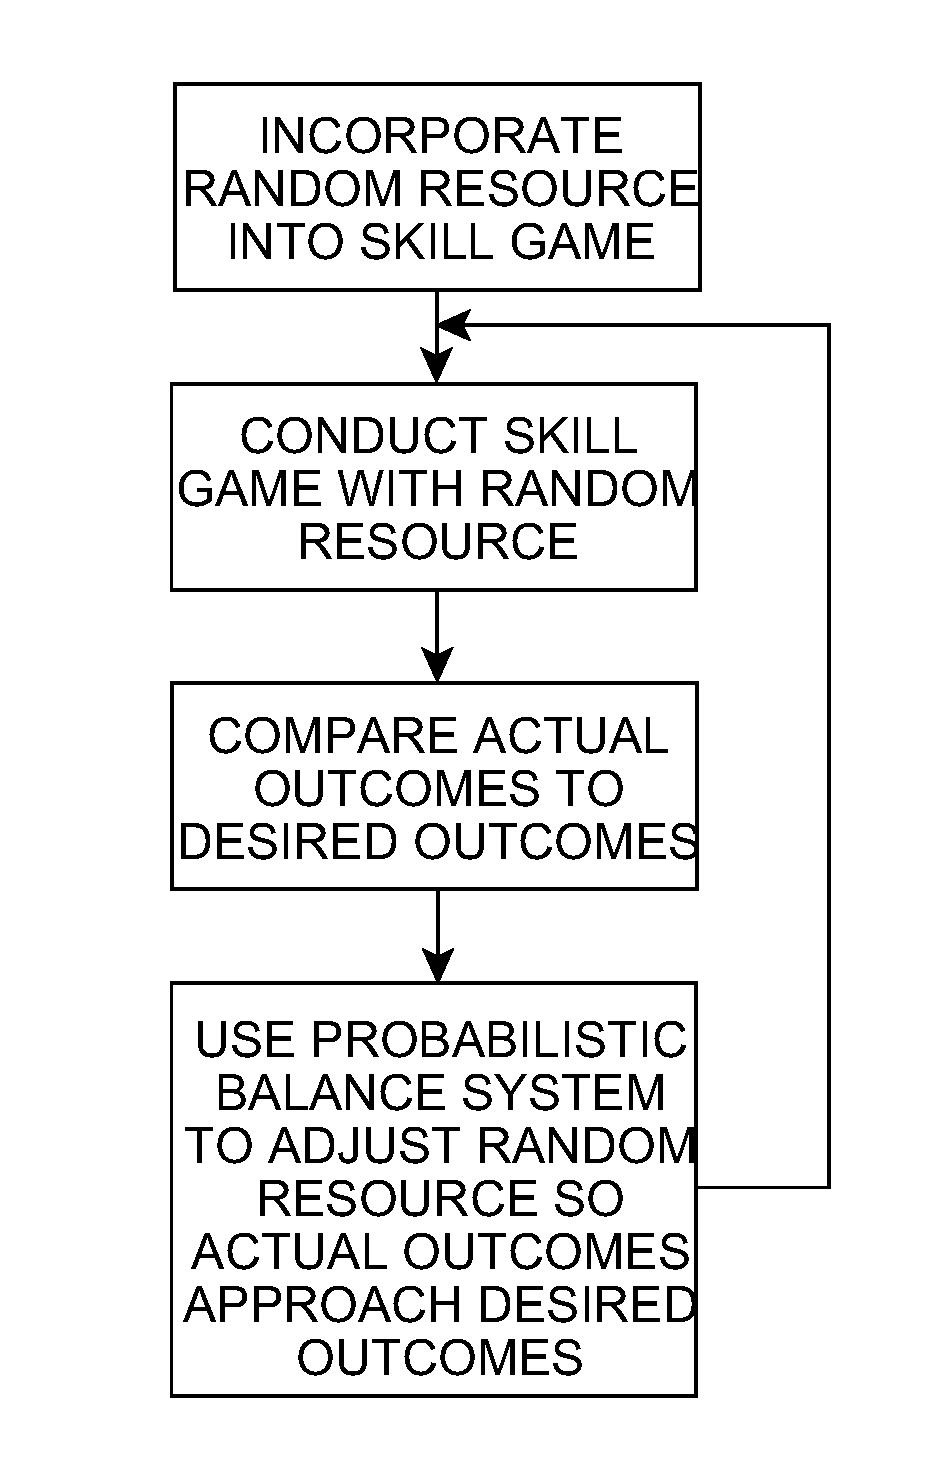 System for Incorporating Chance Into Interactive Games Requiring the Application of Intellectual or Motor Skills